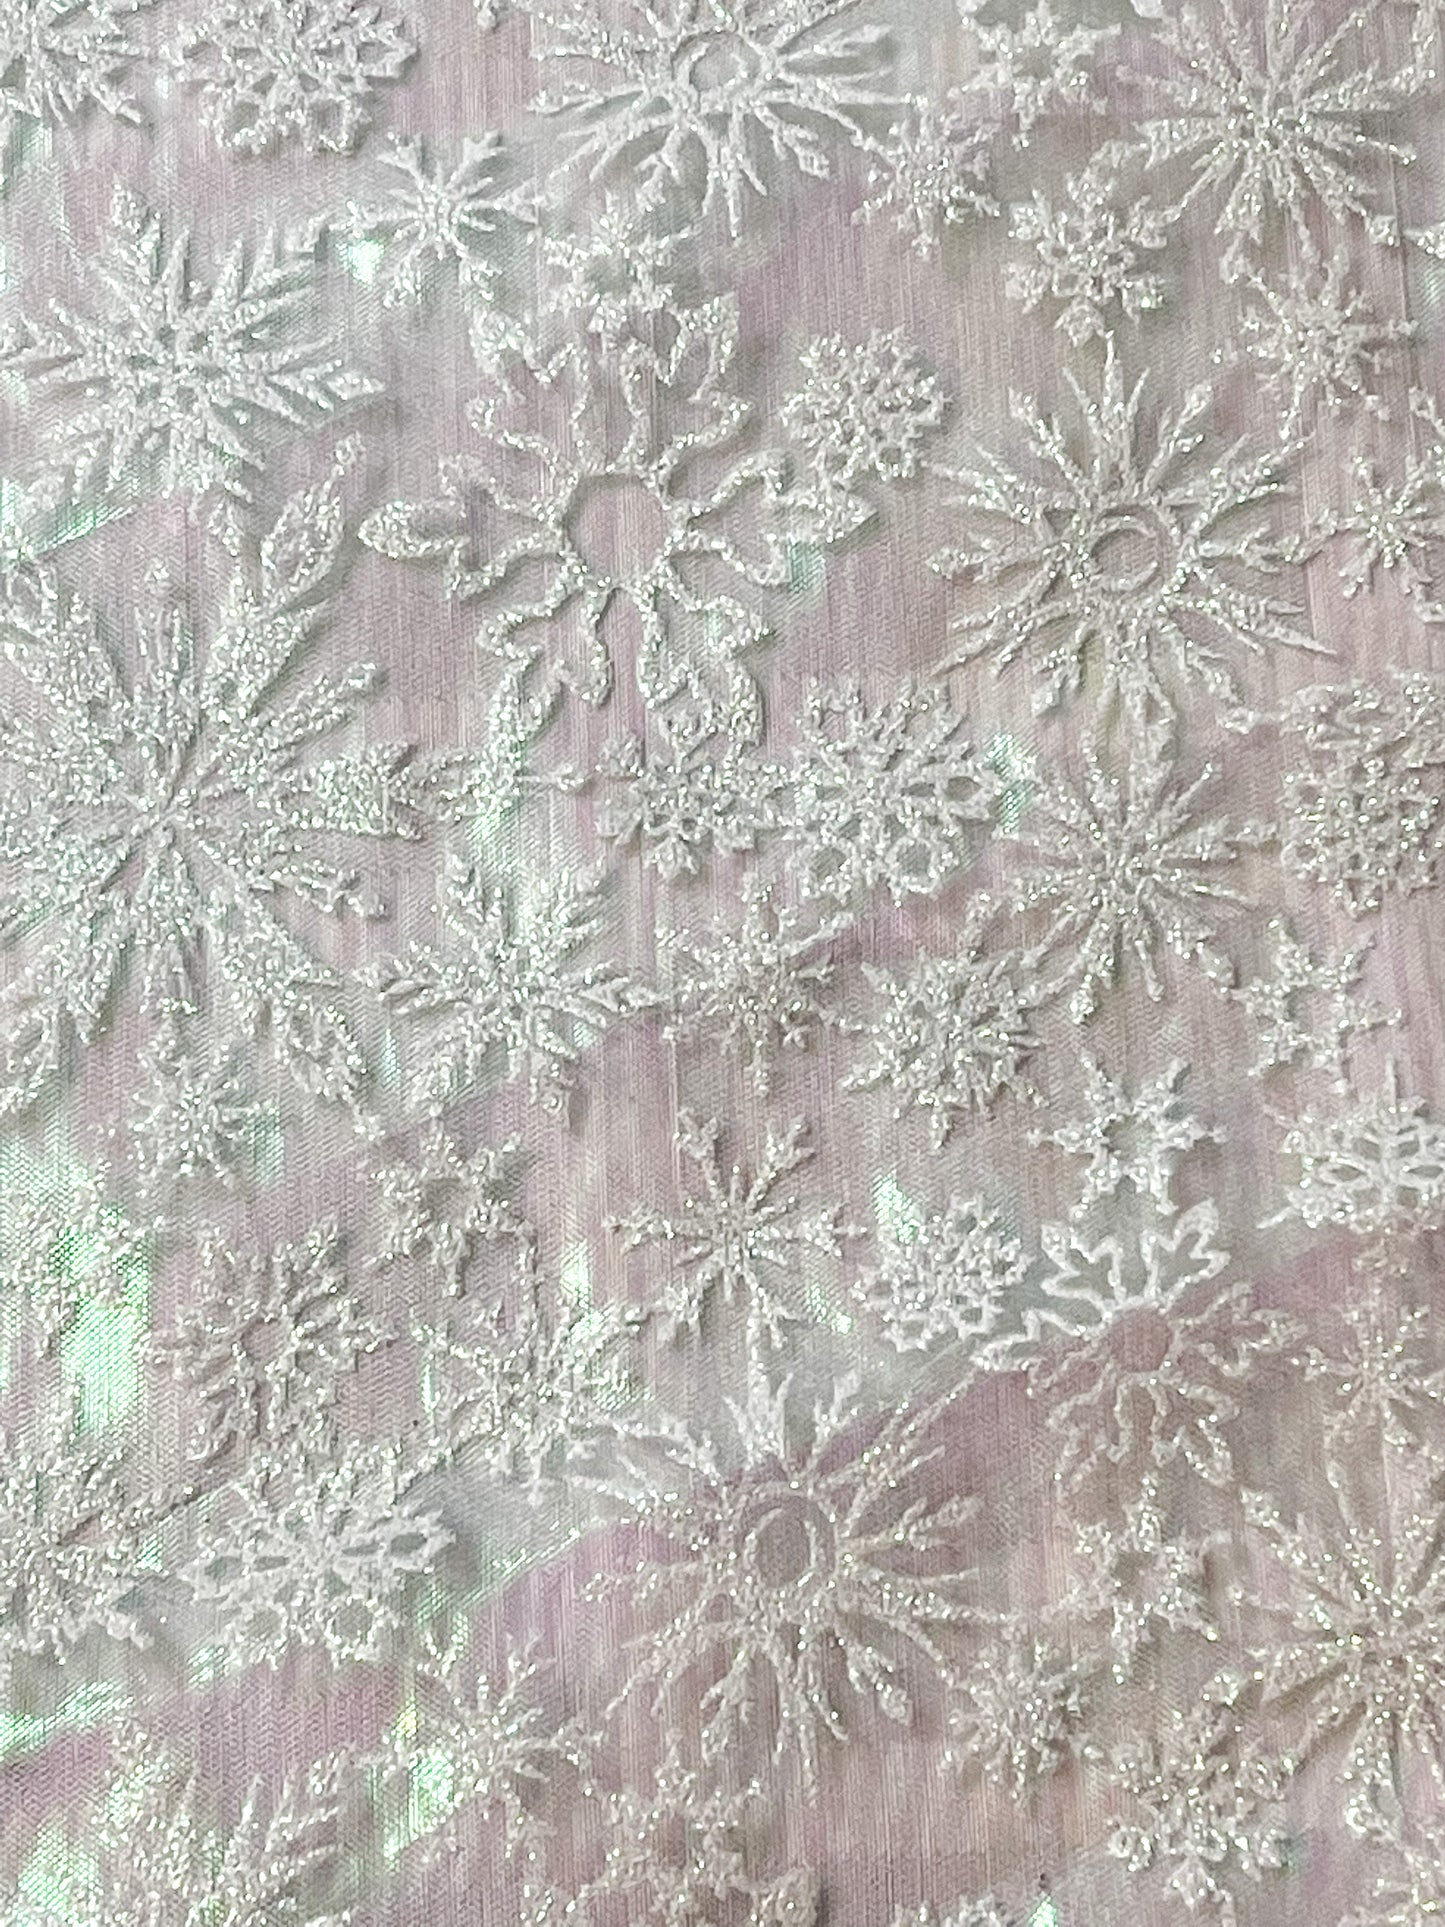 Clearance -clear shimmer with white glitter snowflakes-yardage